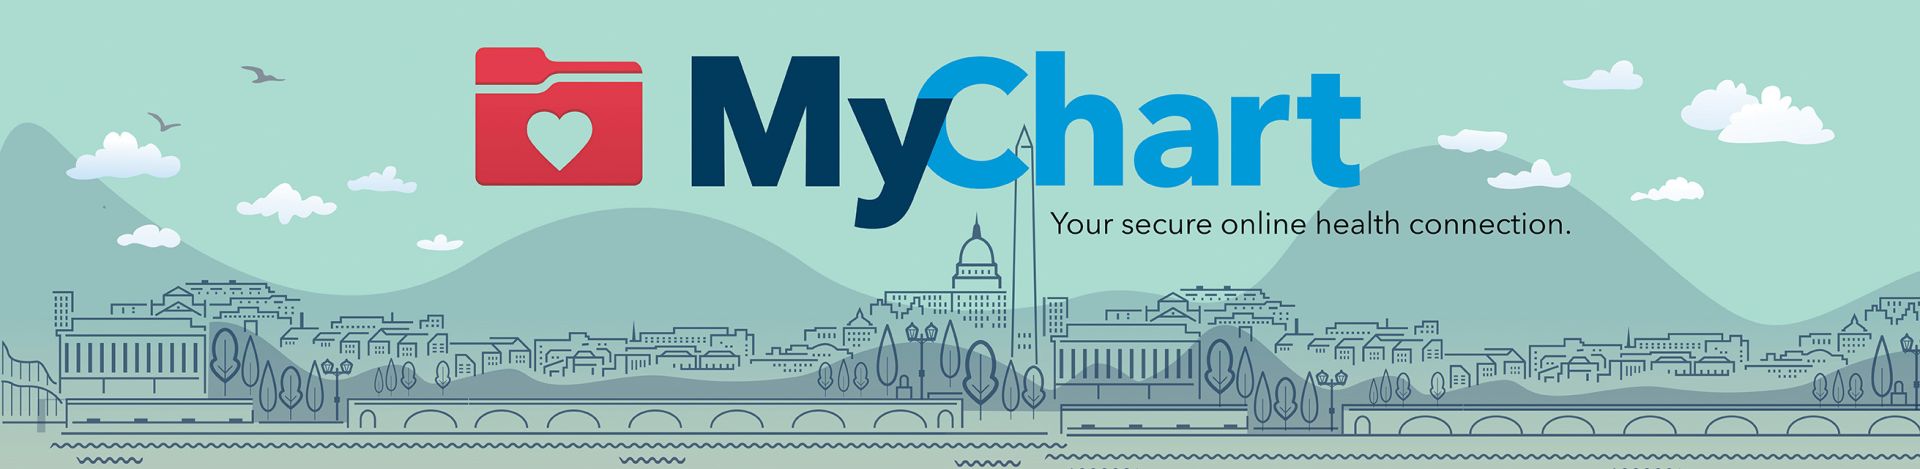 MyChart is Here